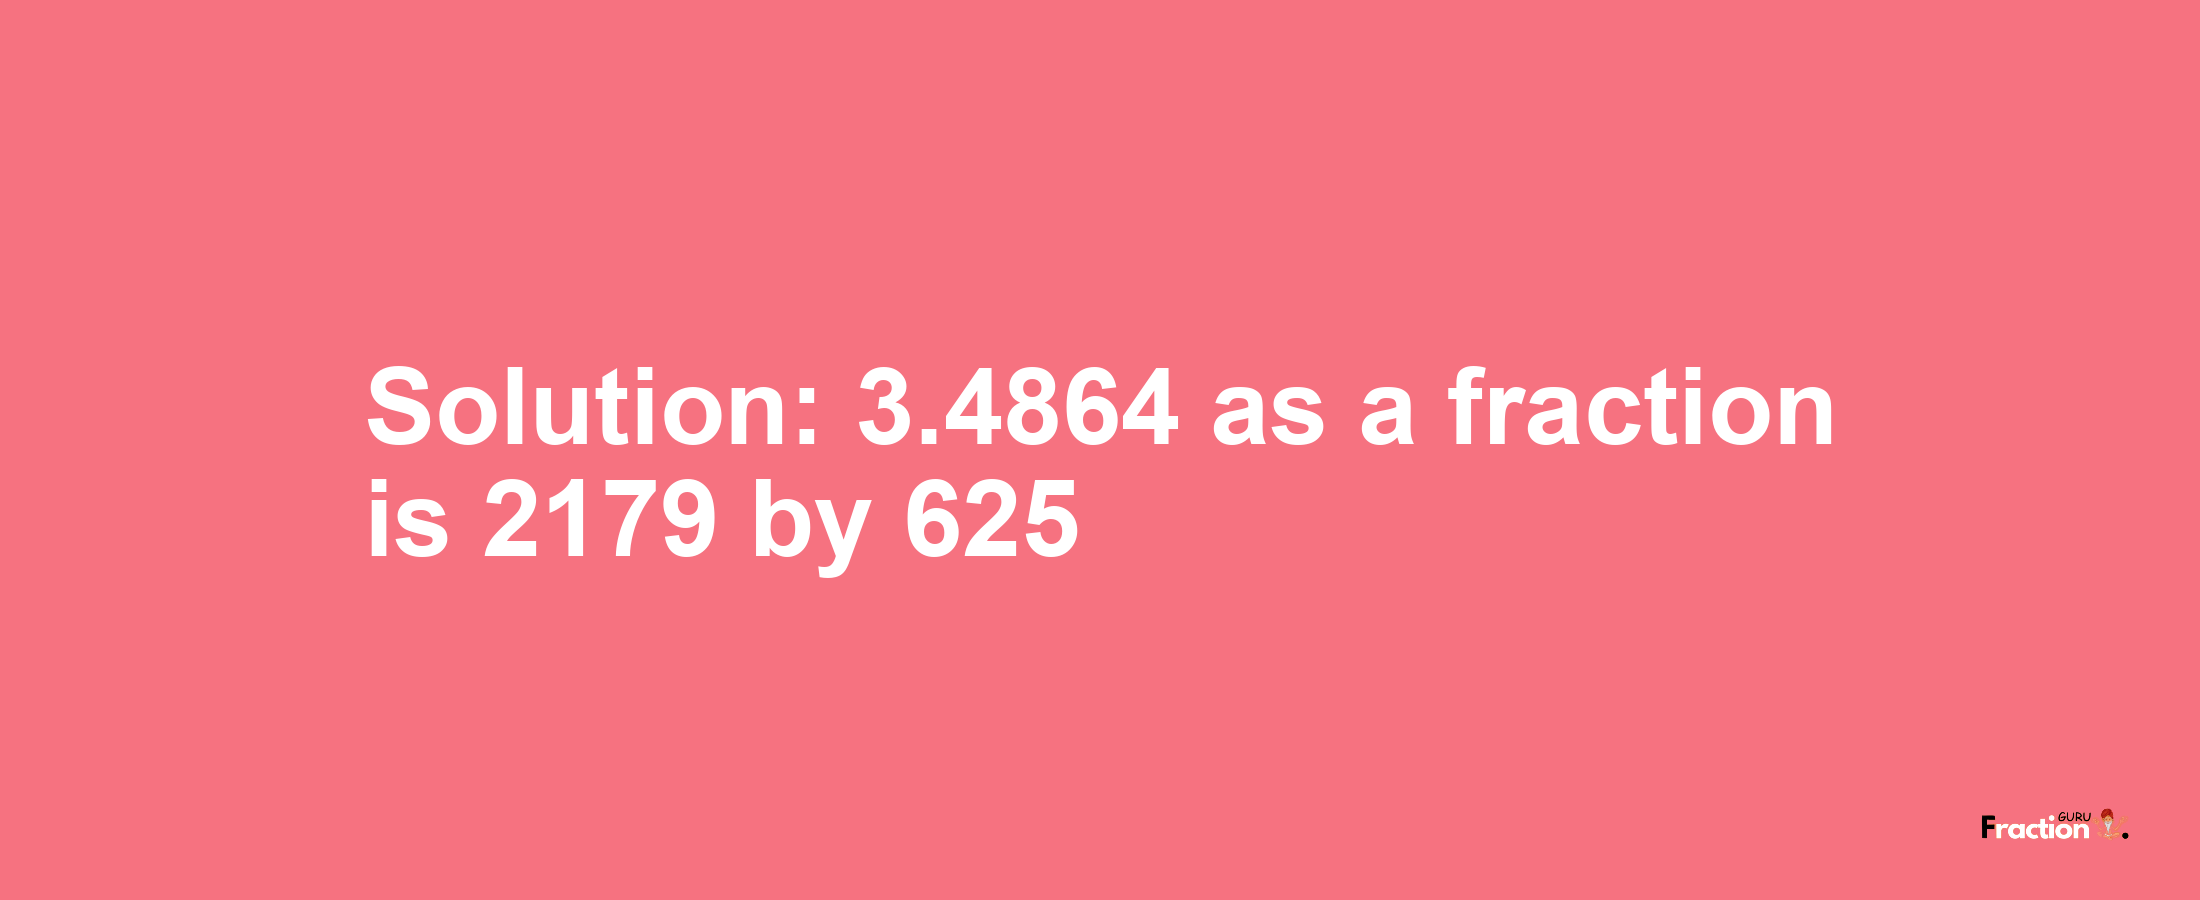 Solution:3.4864 as a fraction is 2179/625